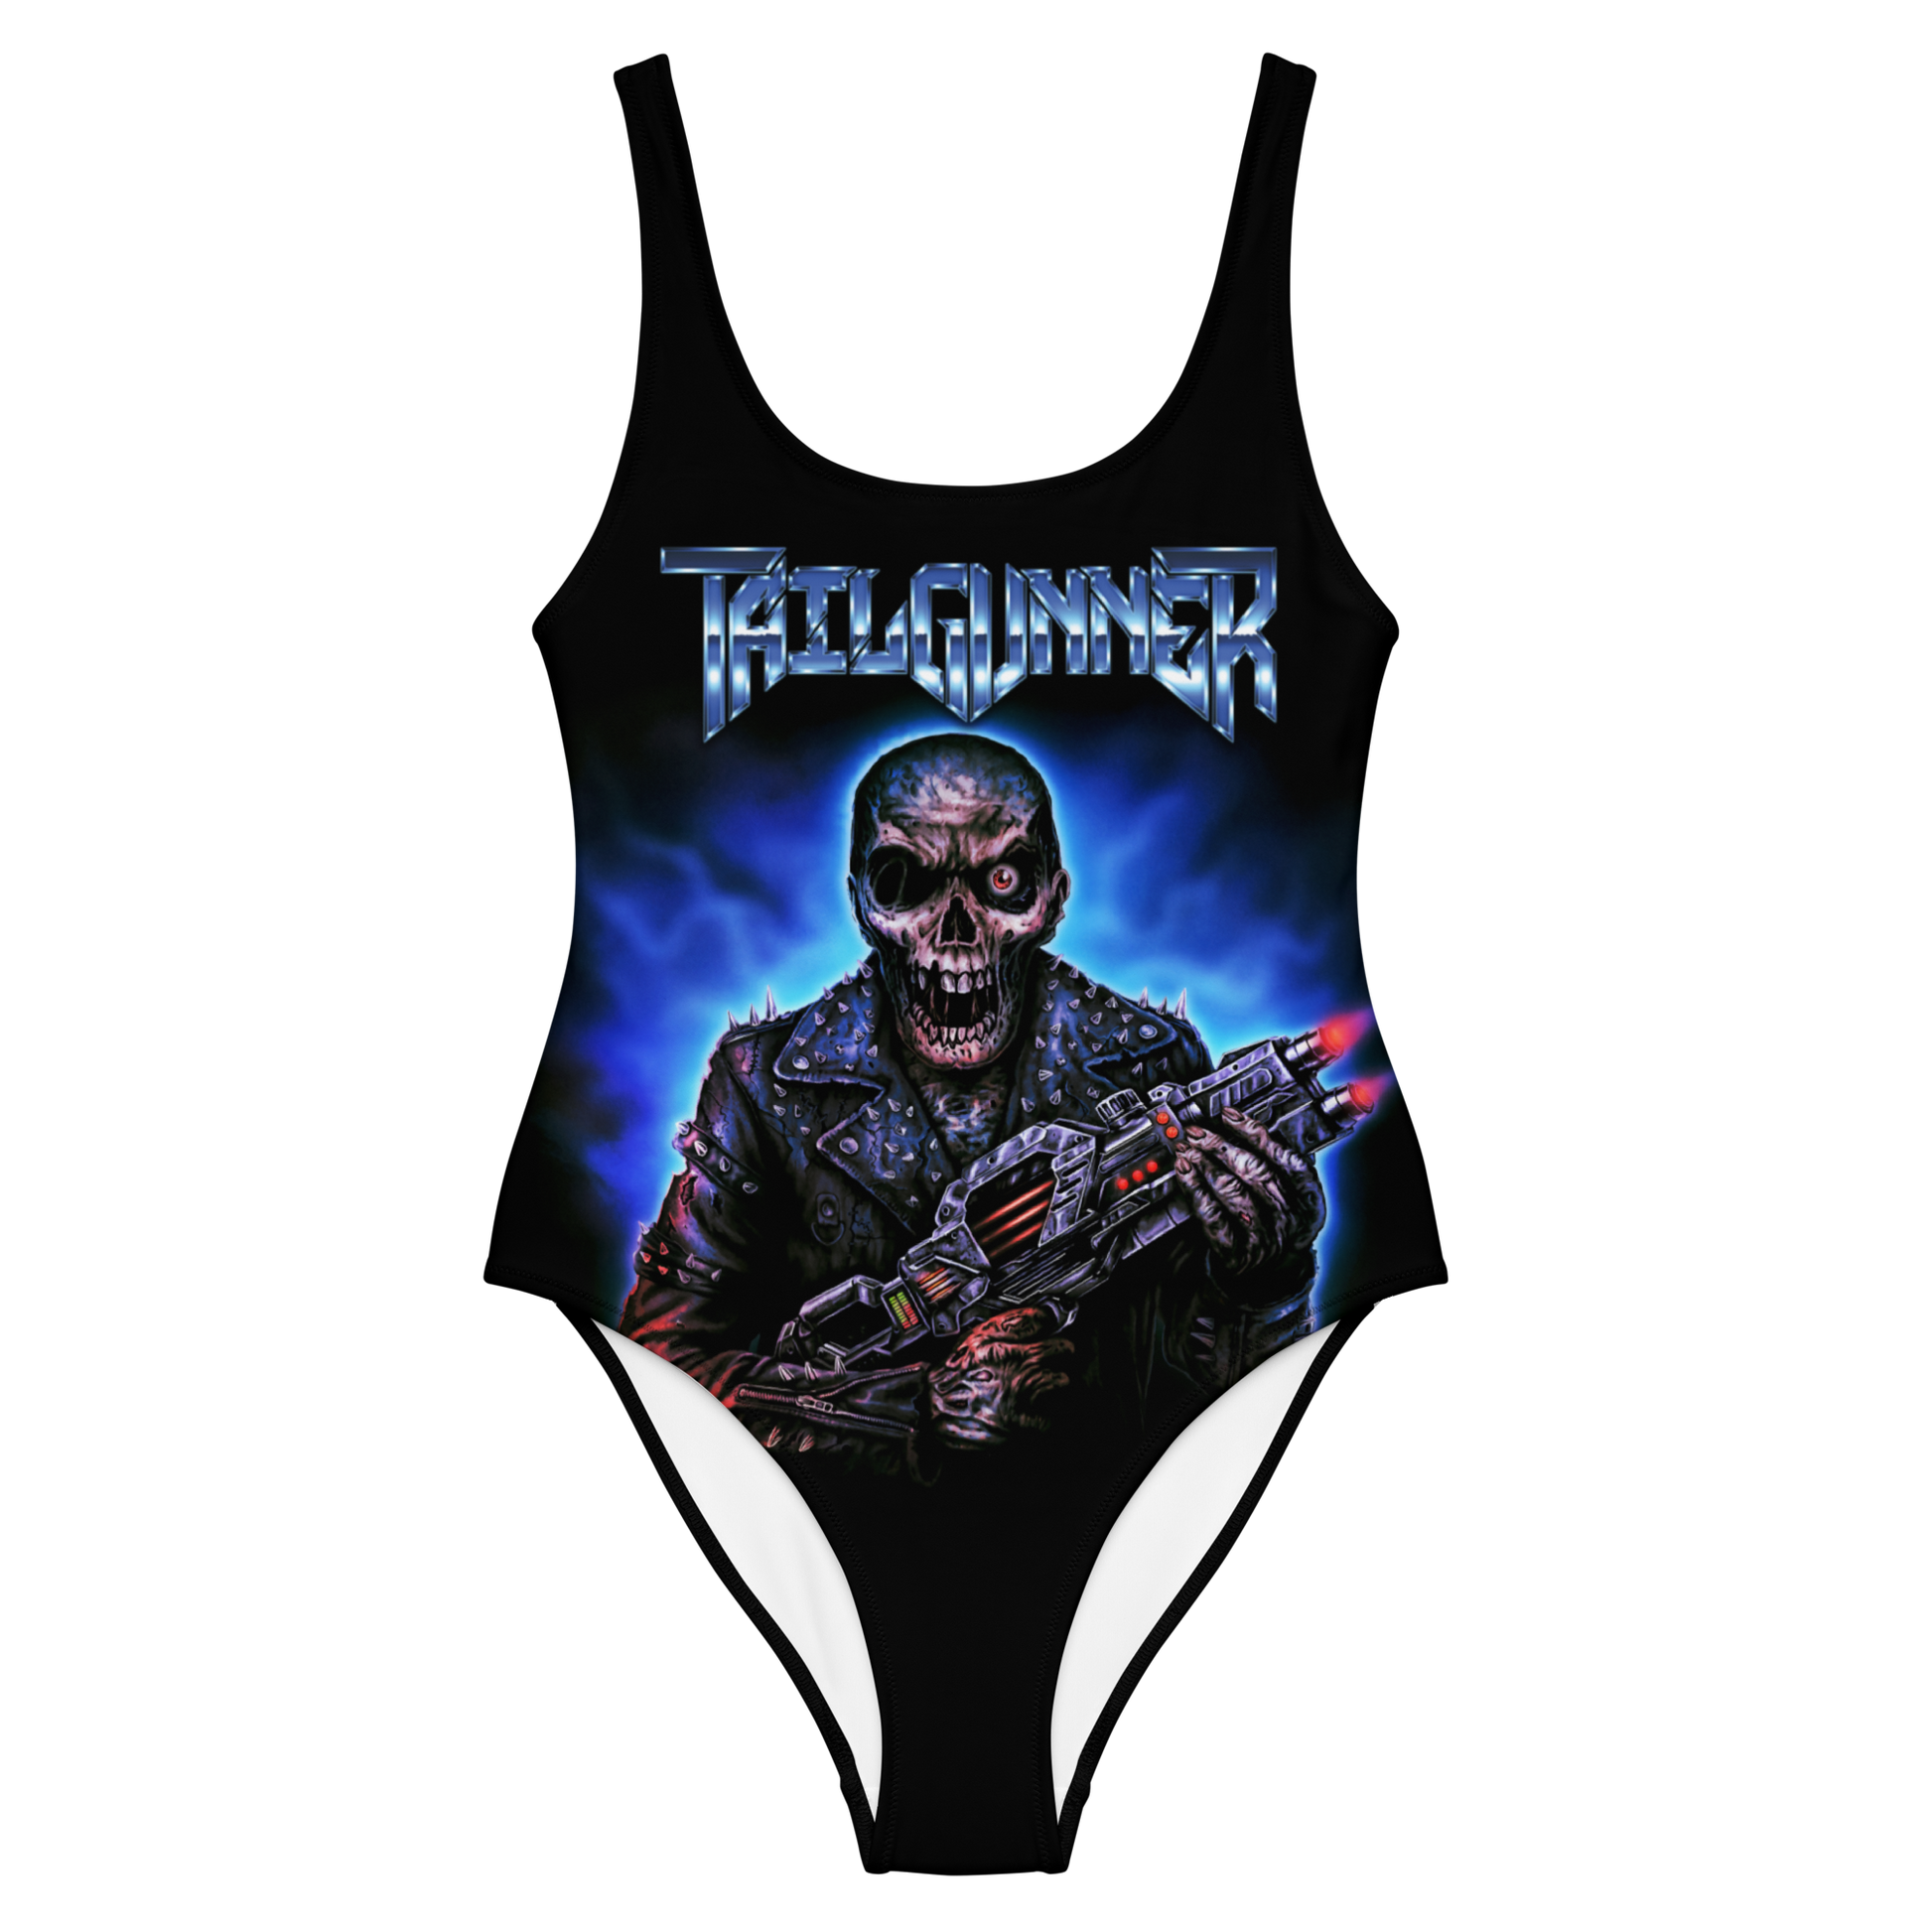 Tailgunner Guns For Hire official licensed one piece swimsuit by Metal Mistress